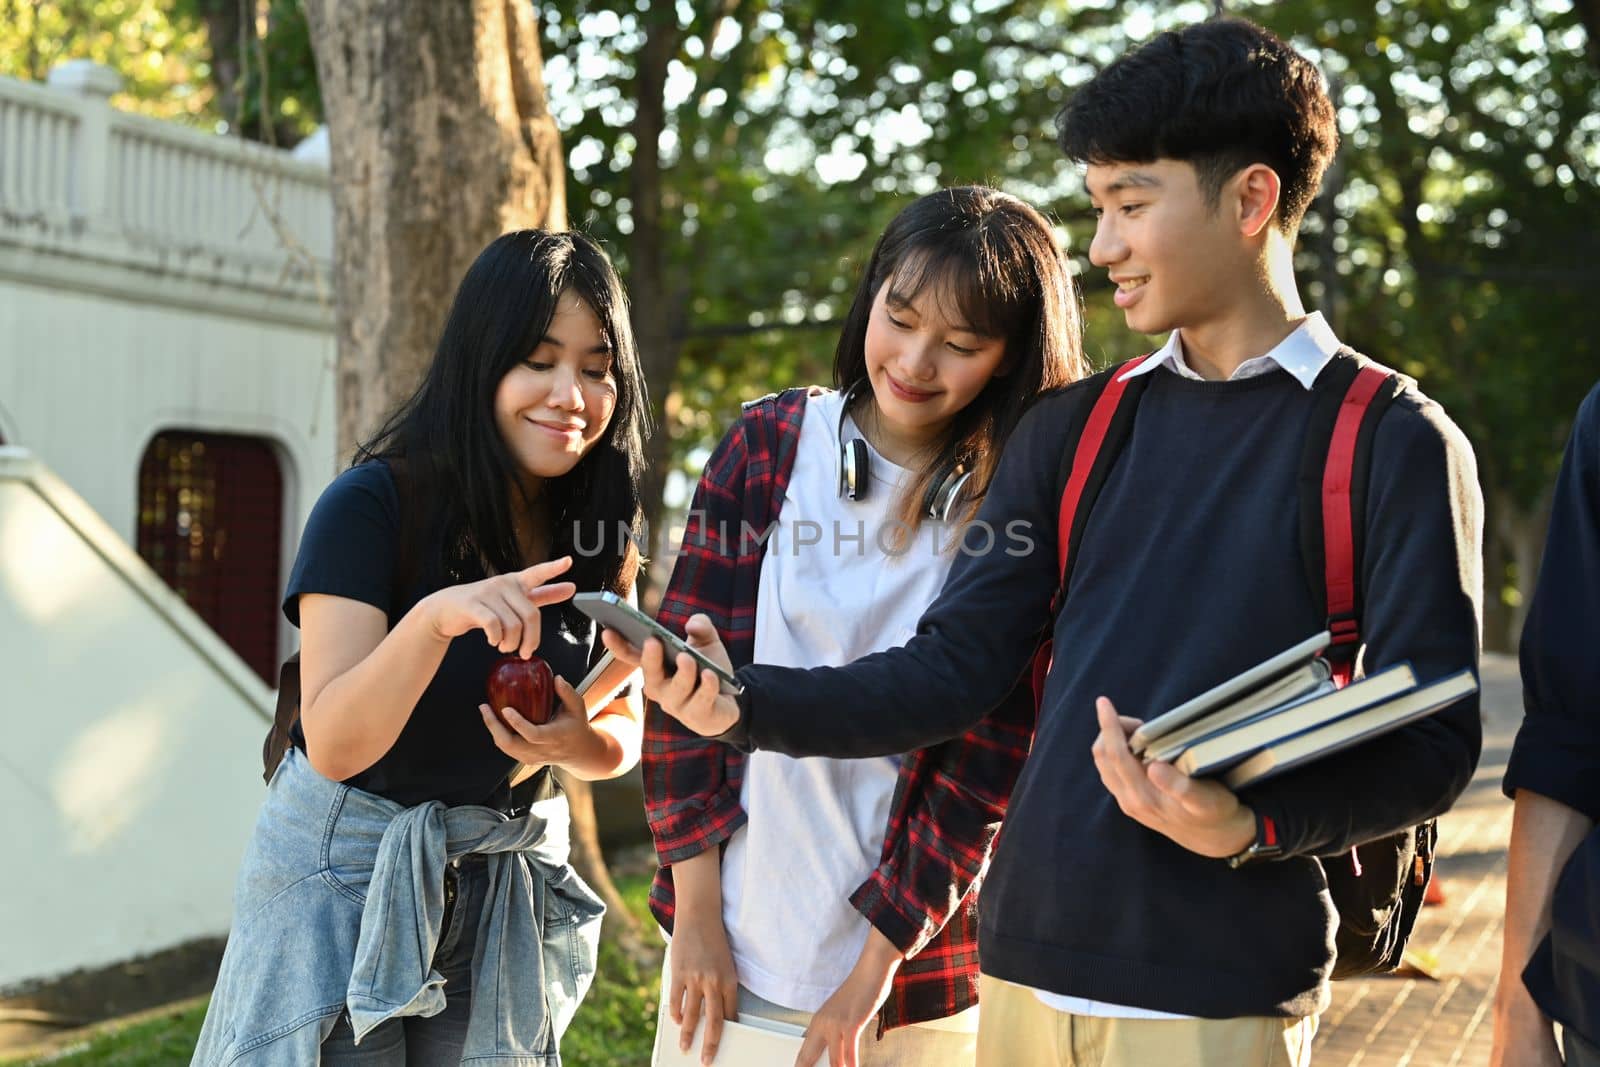 Group of asian students using mobile phone while walking together outdoors at university campus. Youth and community concept.